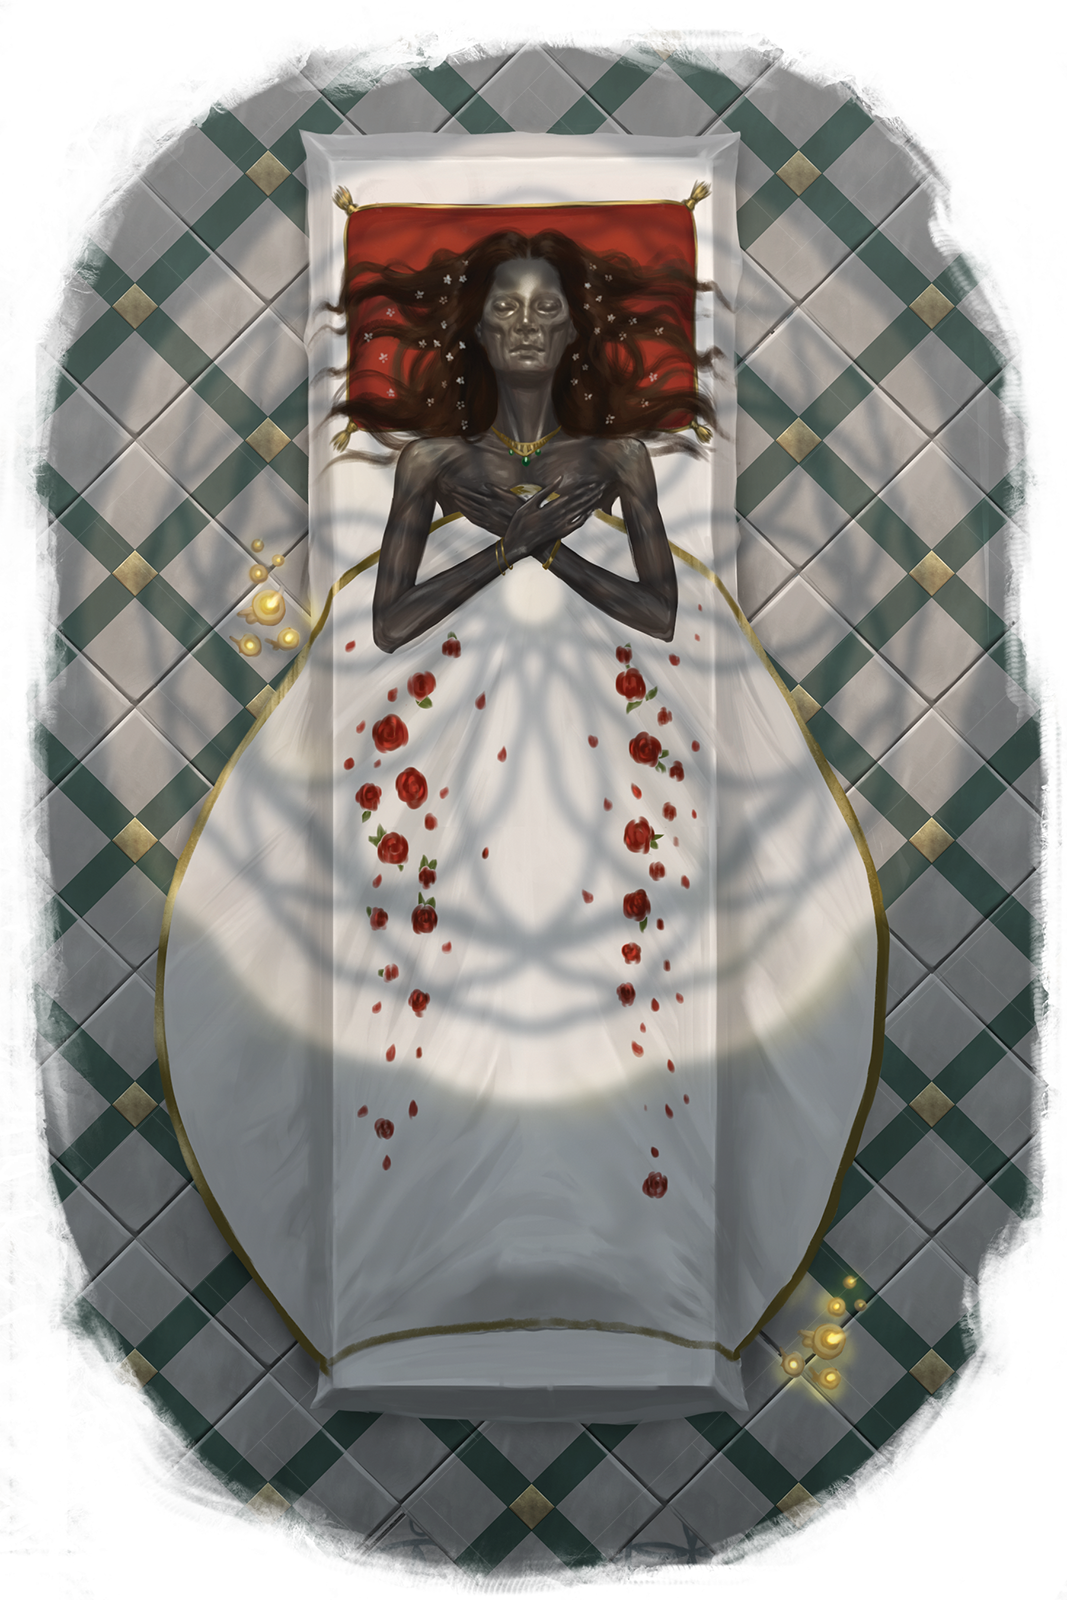 The Maid of Anactoria: a mummified body laying on a stone table with a white sheet and roses over the top of them